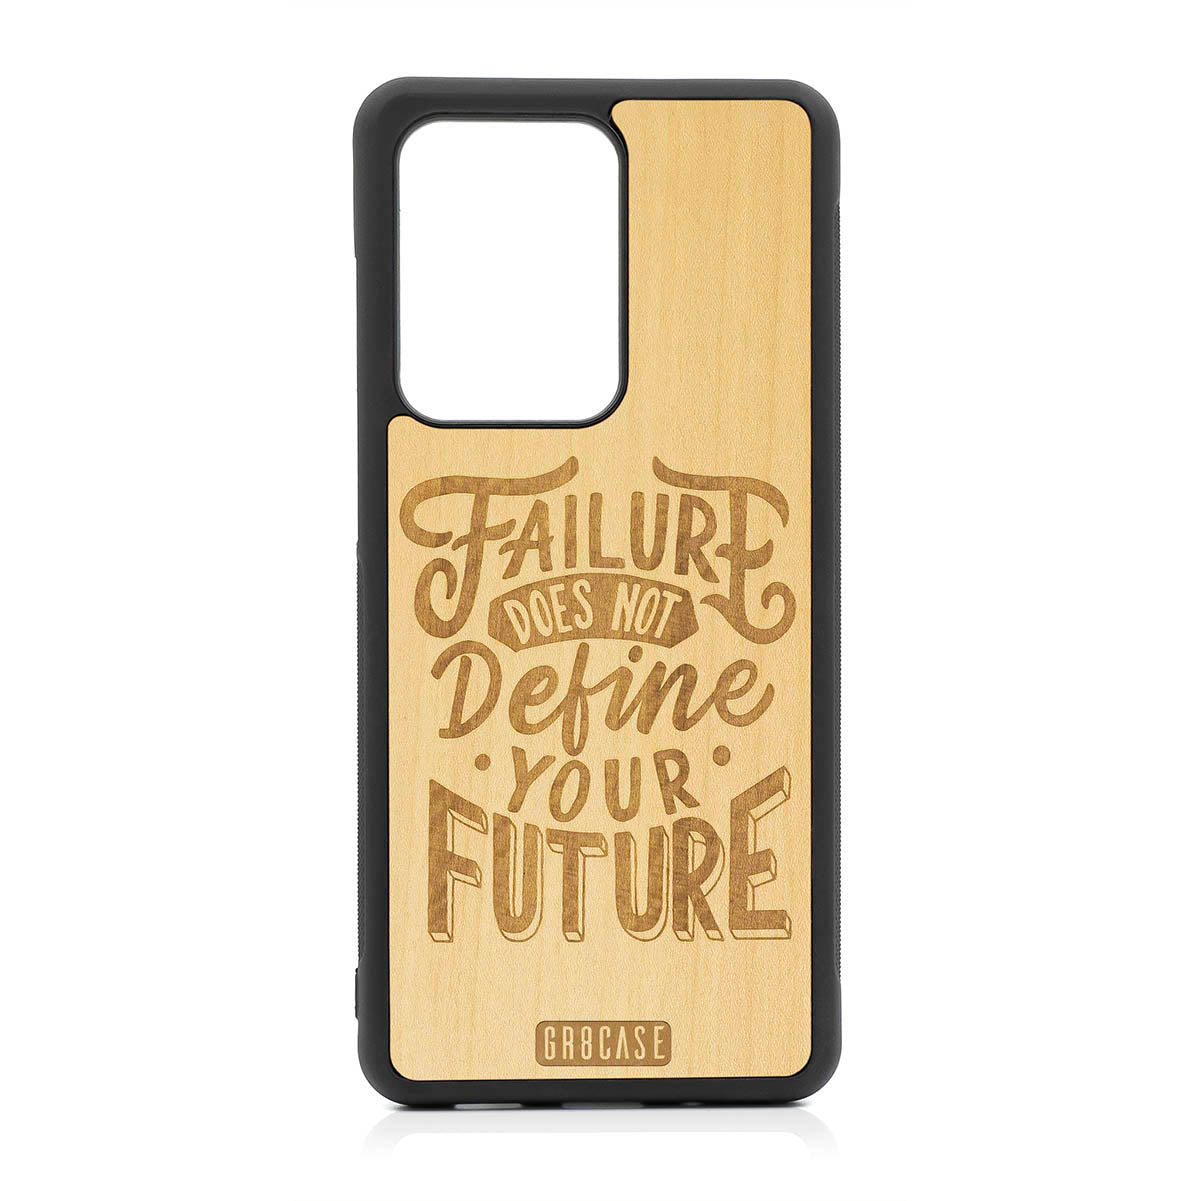 Failure Does Not Define You Future Design Wood Case For Samsung Galaxy S20 Ultra by GR8CASE